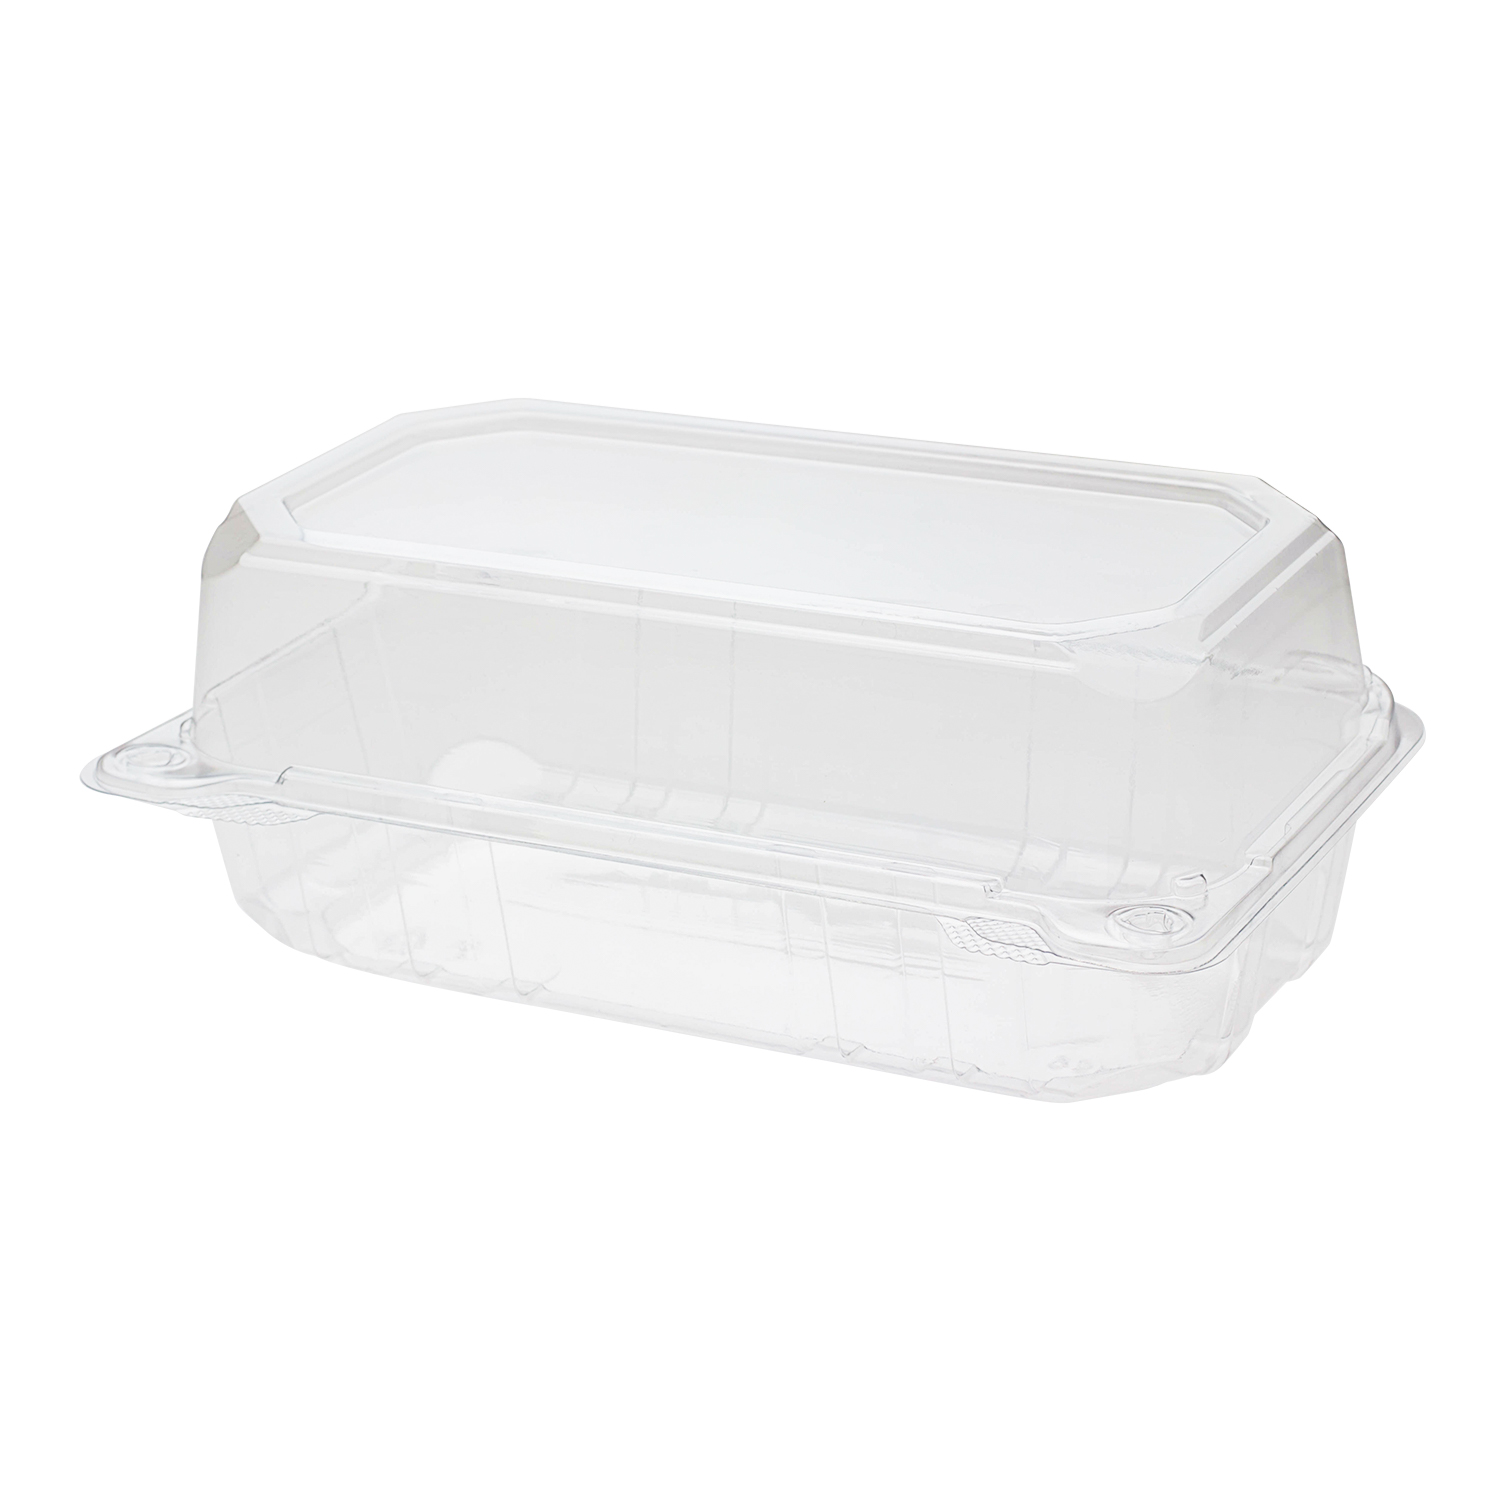 https://cdn.shopify.com/s/files/1/3105/5038/products/half-clamshell-takeout-container_1024x1024@2x.png?v=1609915200